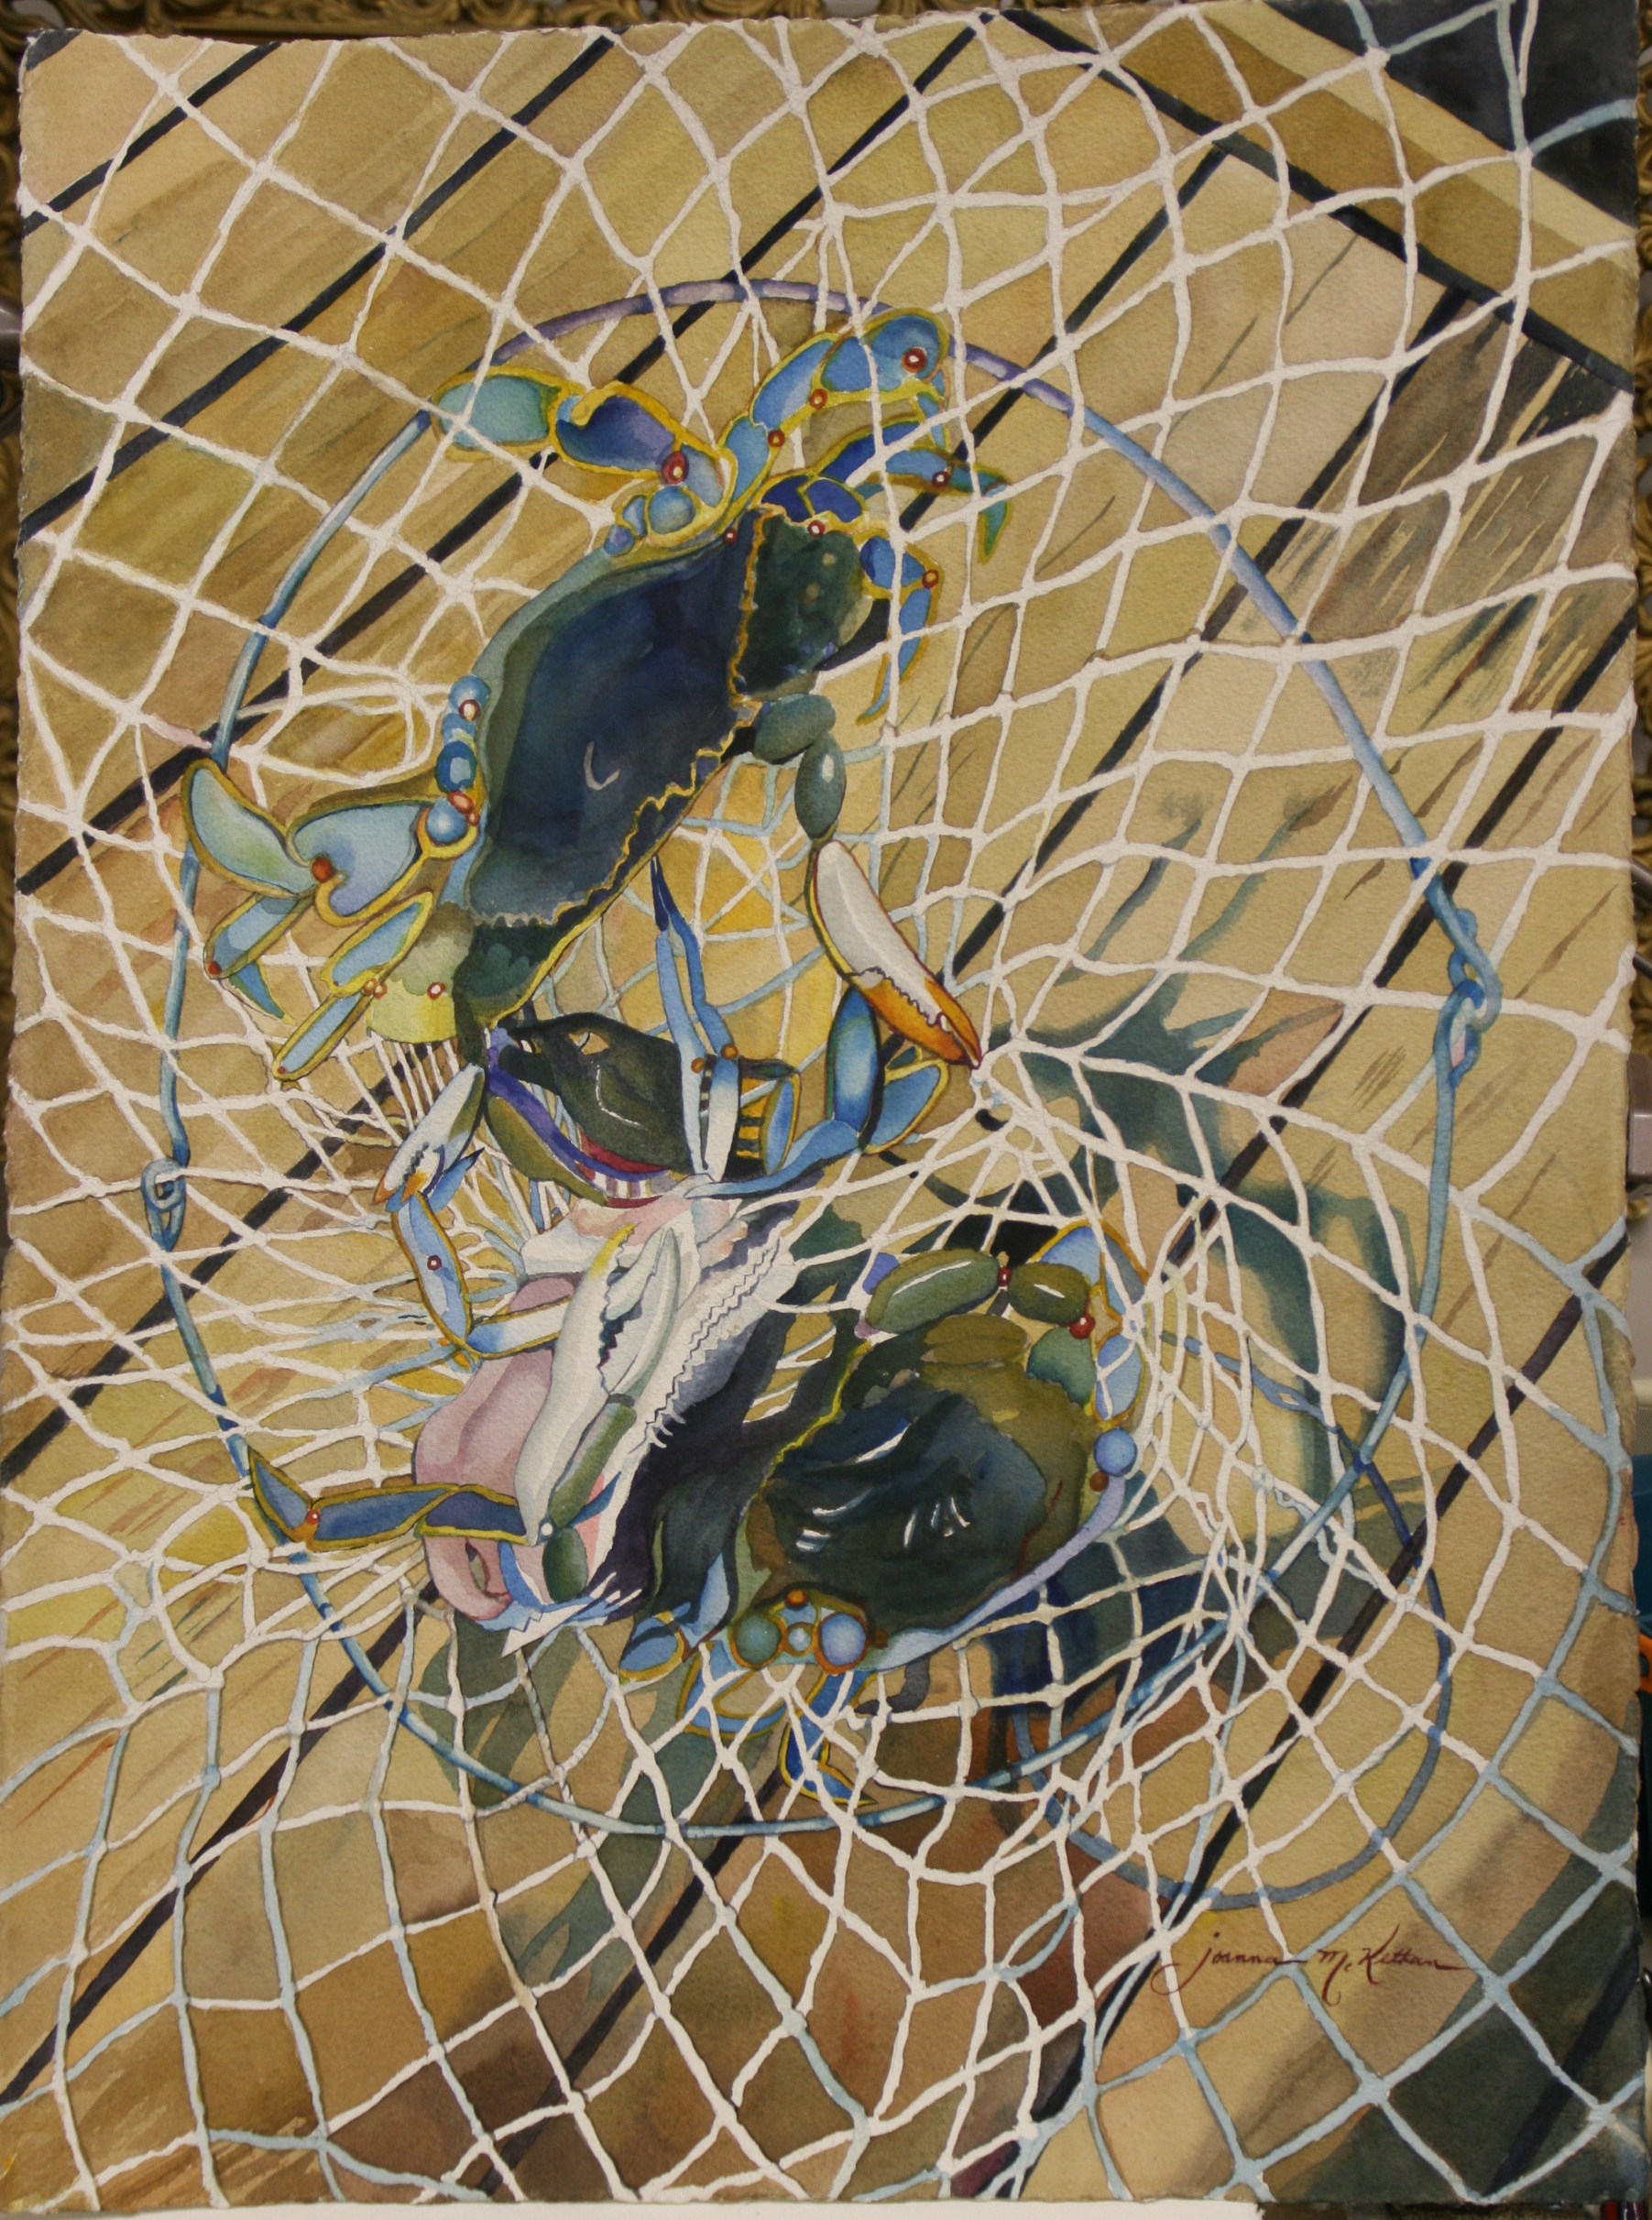 CRAB-NET' WATERCOLOR NETS 2ND MAJOR SHOW